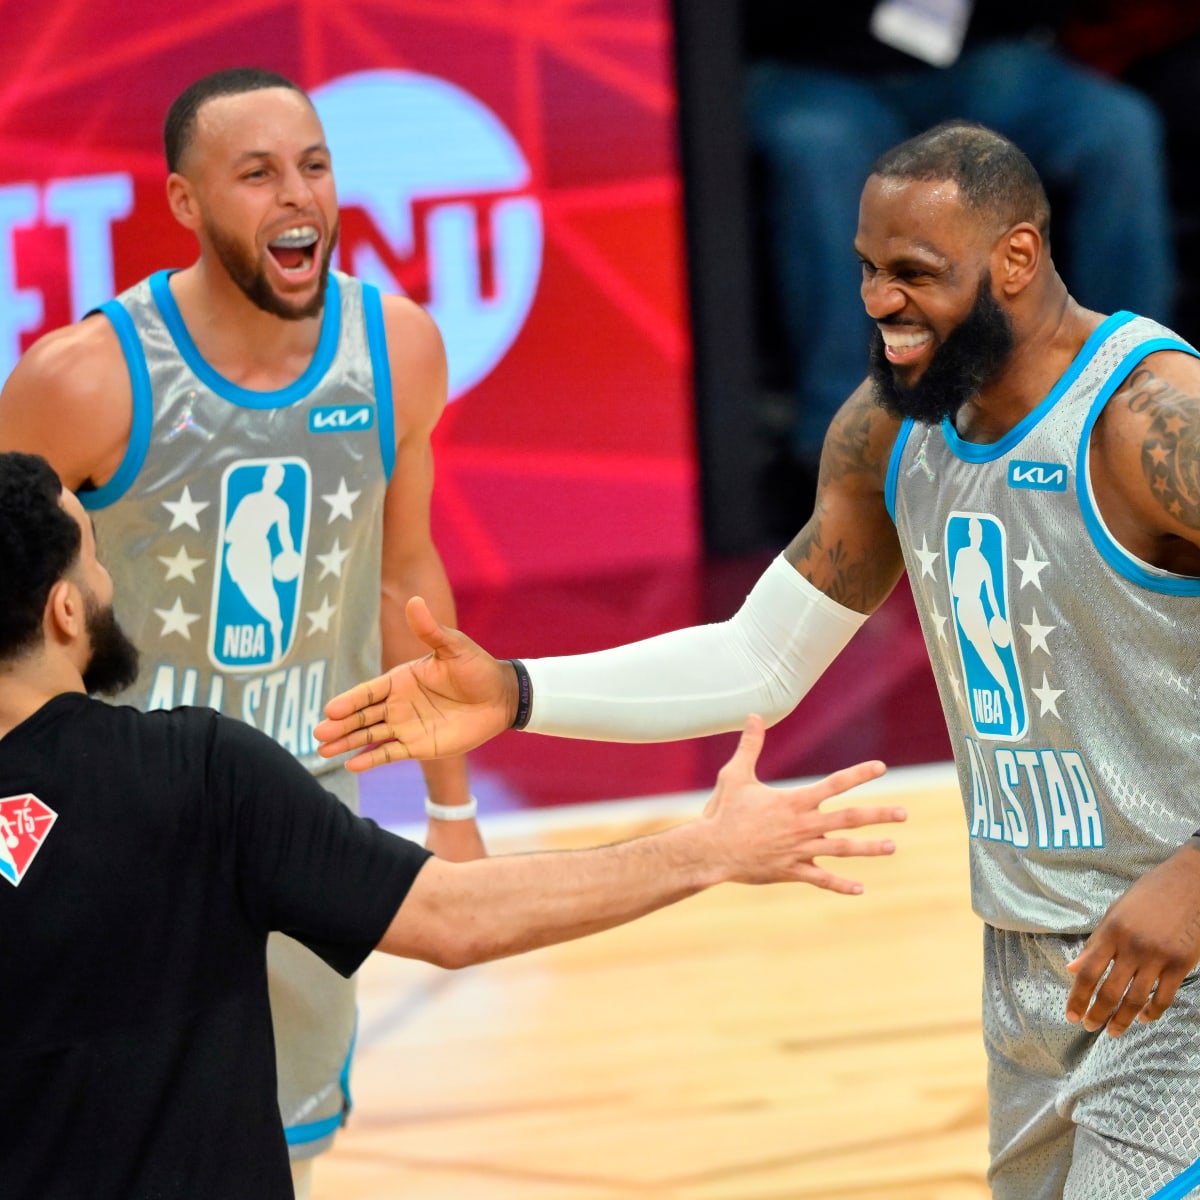 Stephen Curry, LeBron James steal show in NBA All-Star Game